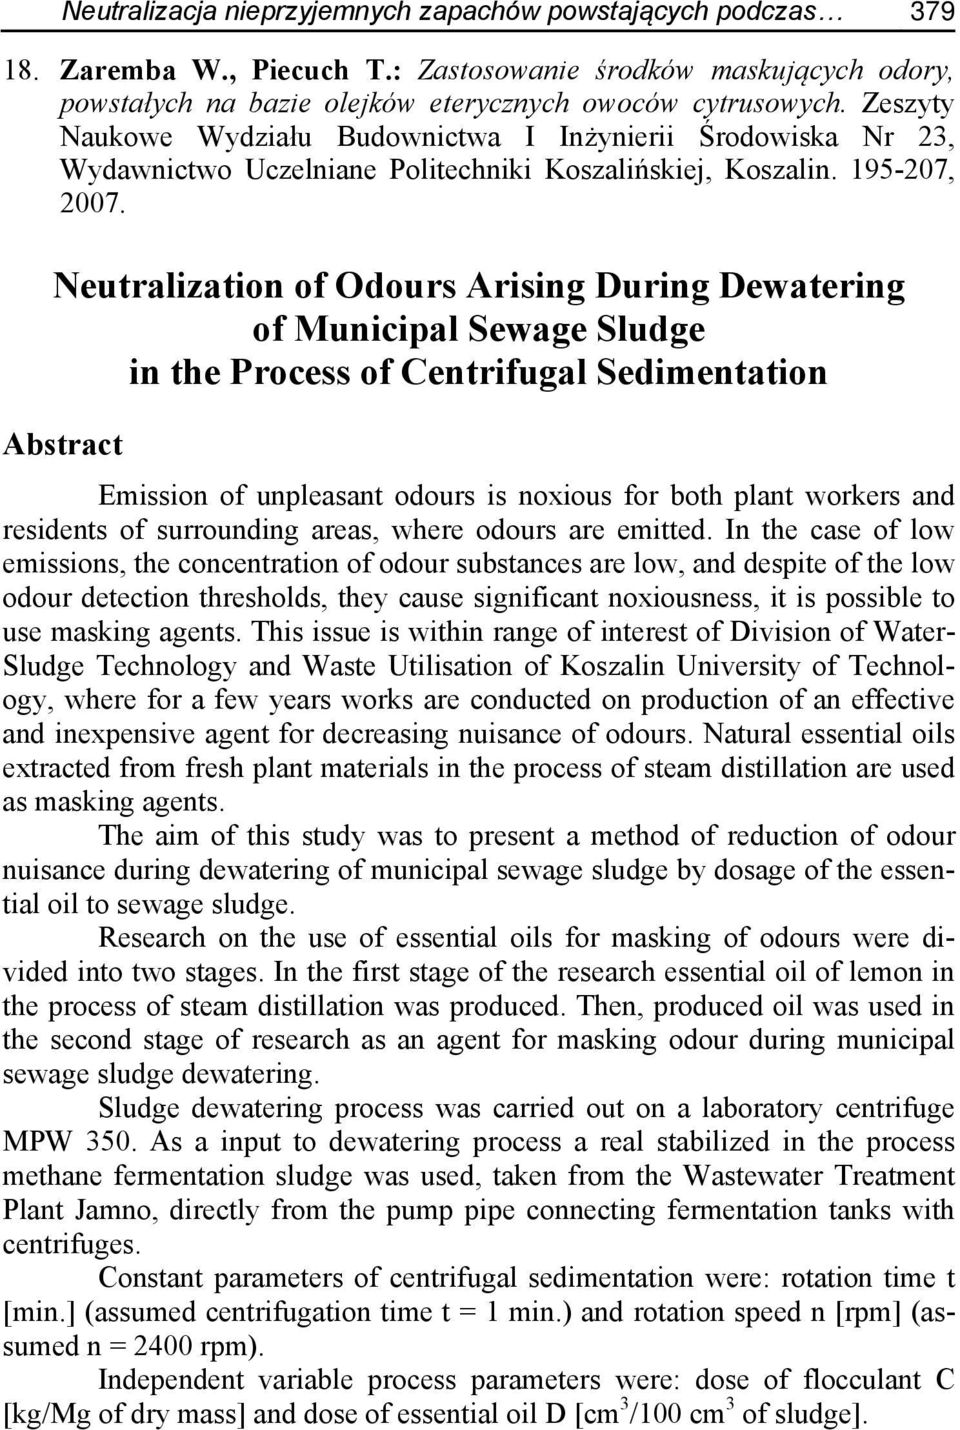 Neutralization of Odours Arising During Dewatering of Municipal Sewage Sludge in the Process of Centrifugal Sedimentation Abstract Emission of unpleasant odours is noxious for both plant workers and